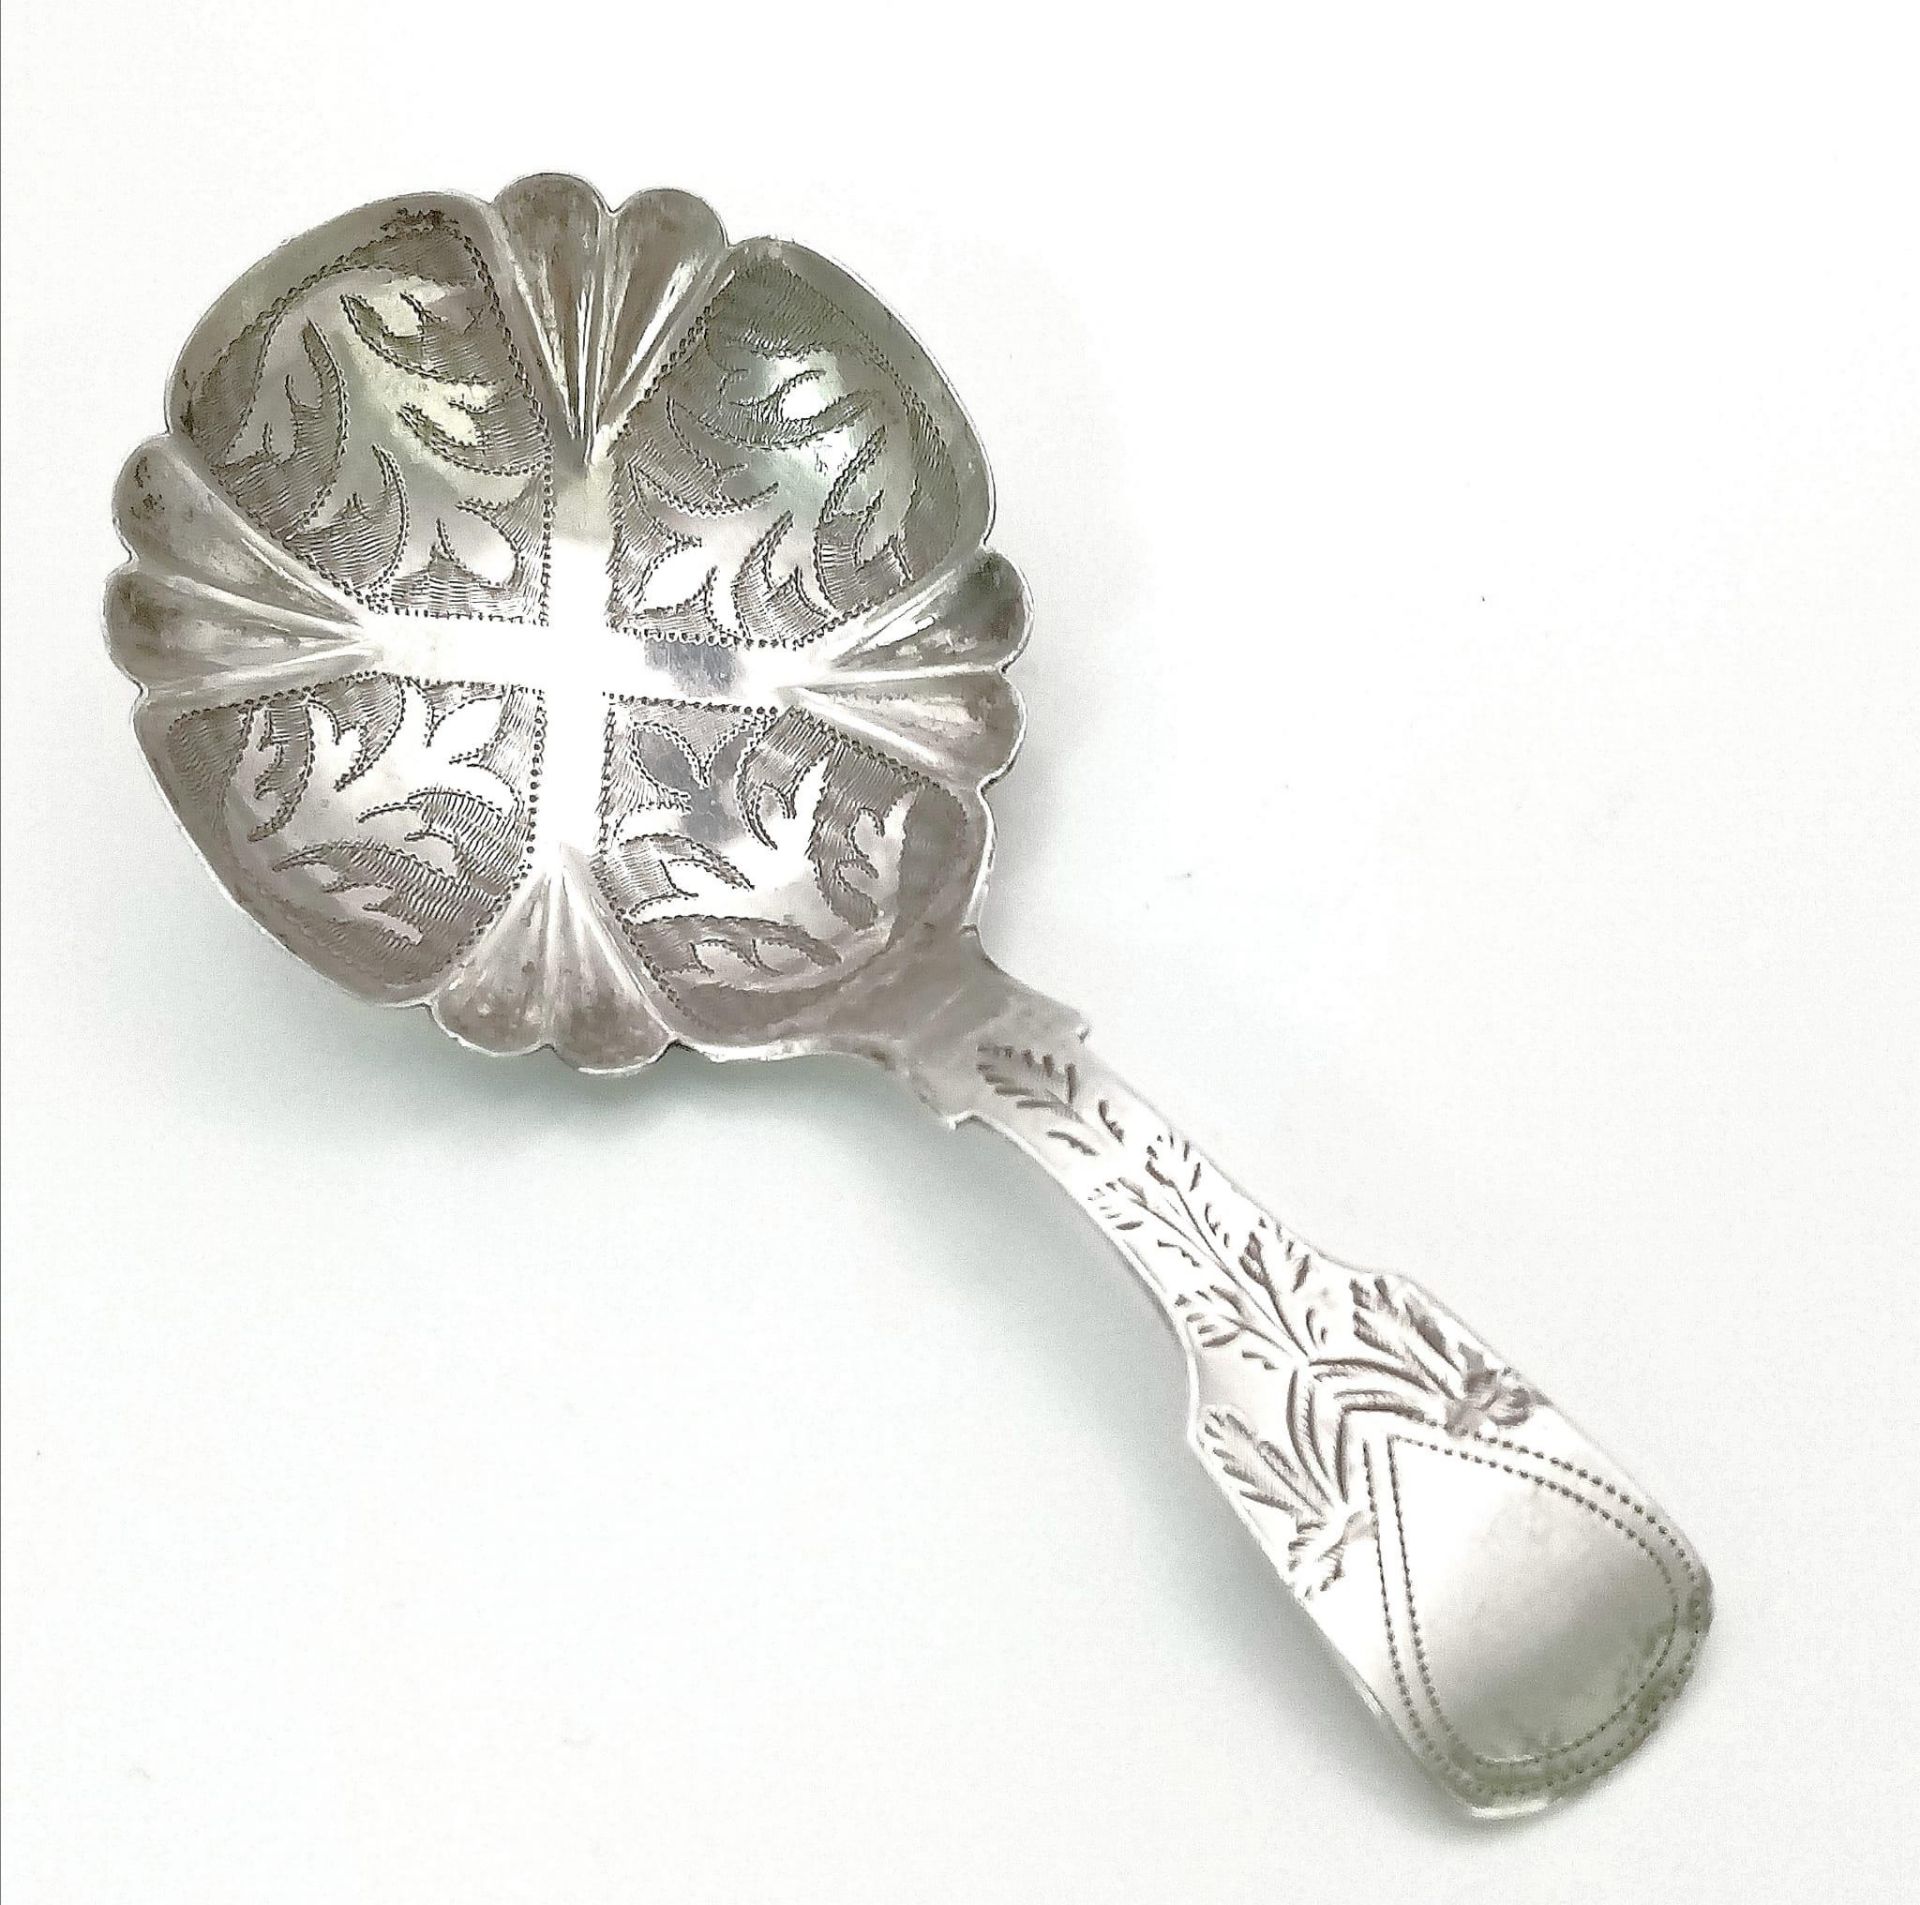 1840's BIRMINGHAM Sterling Silver Tea Caddy Spoon by renowned Taylor & Perry. Delicate and